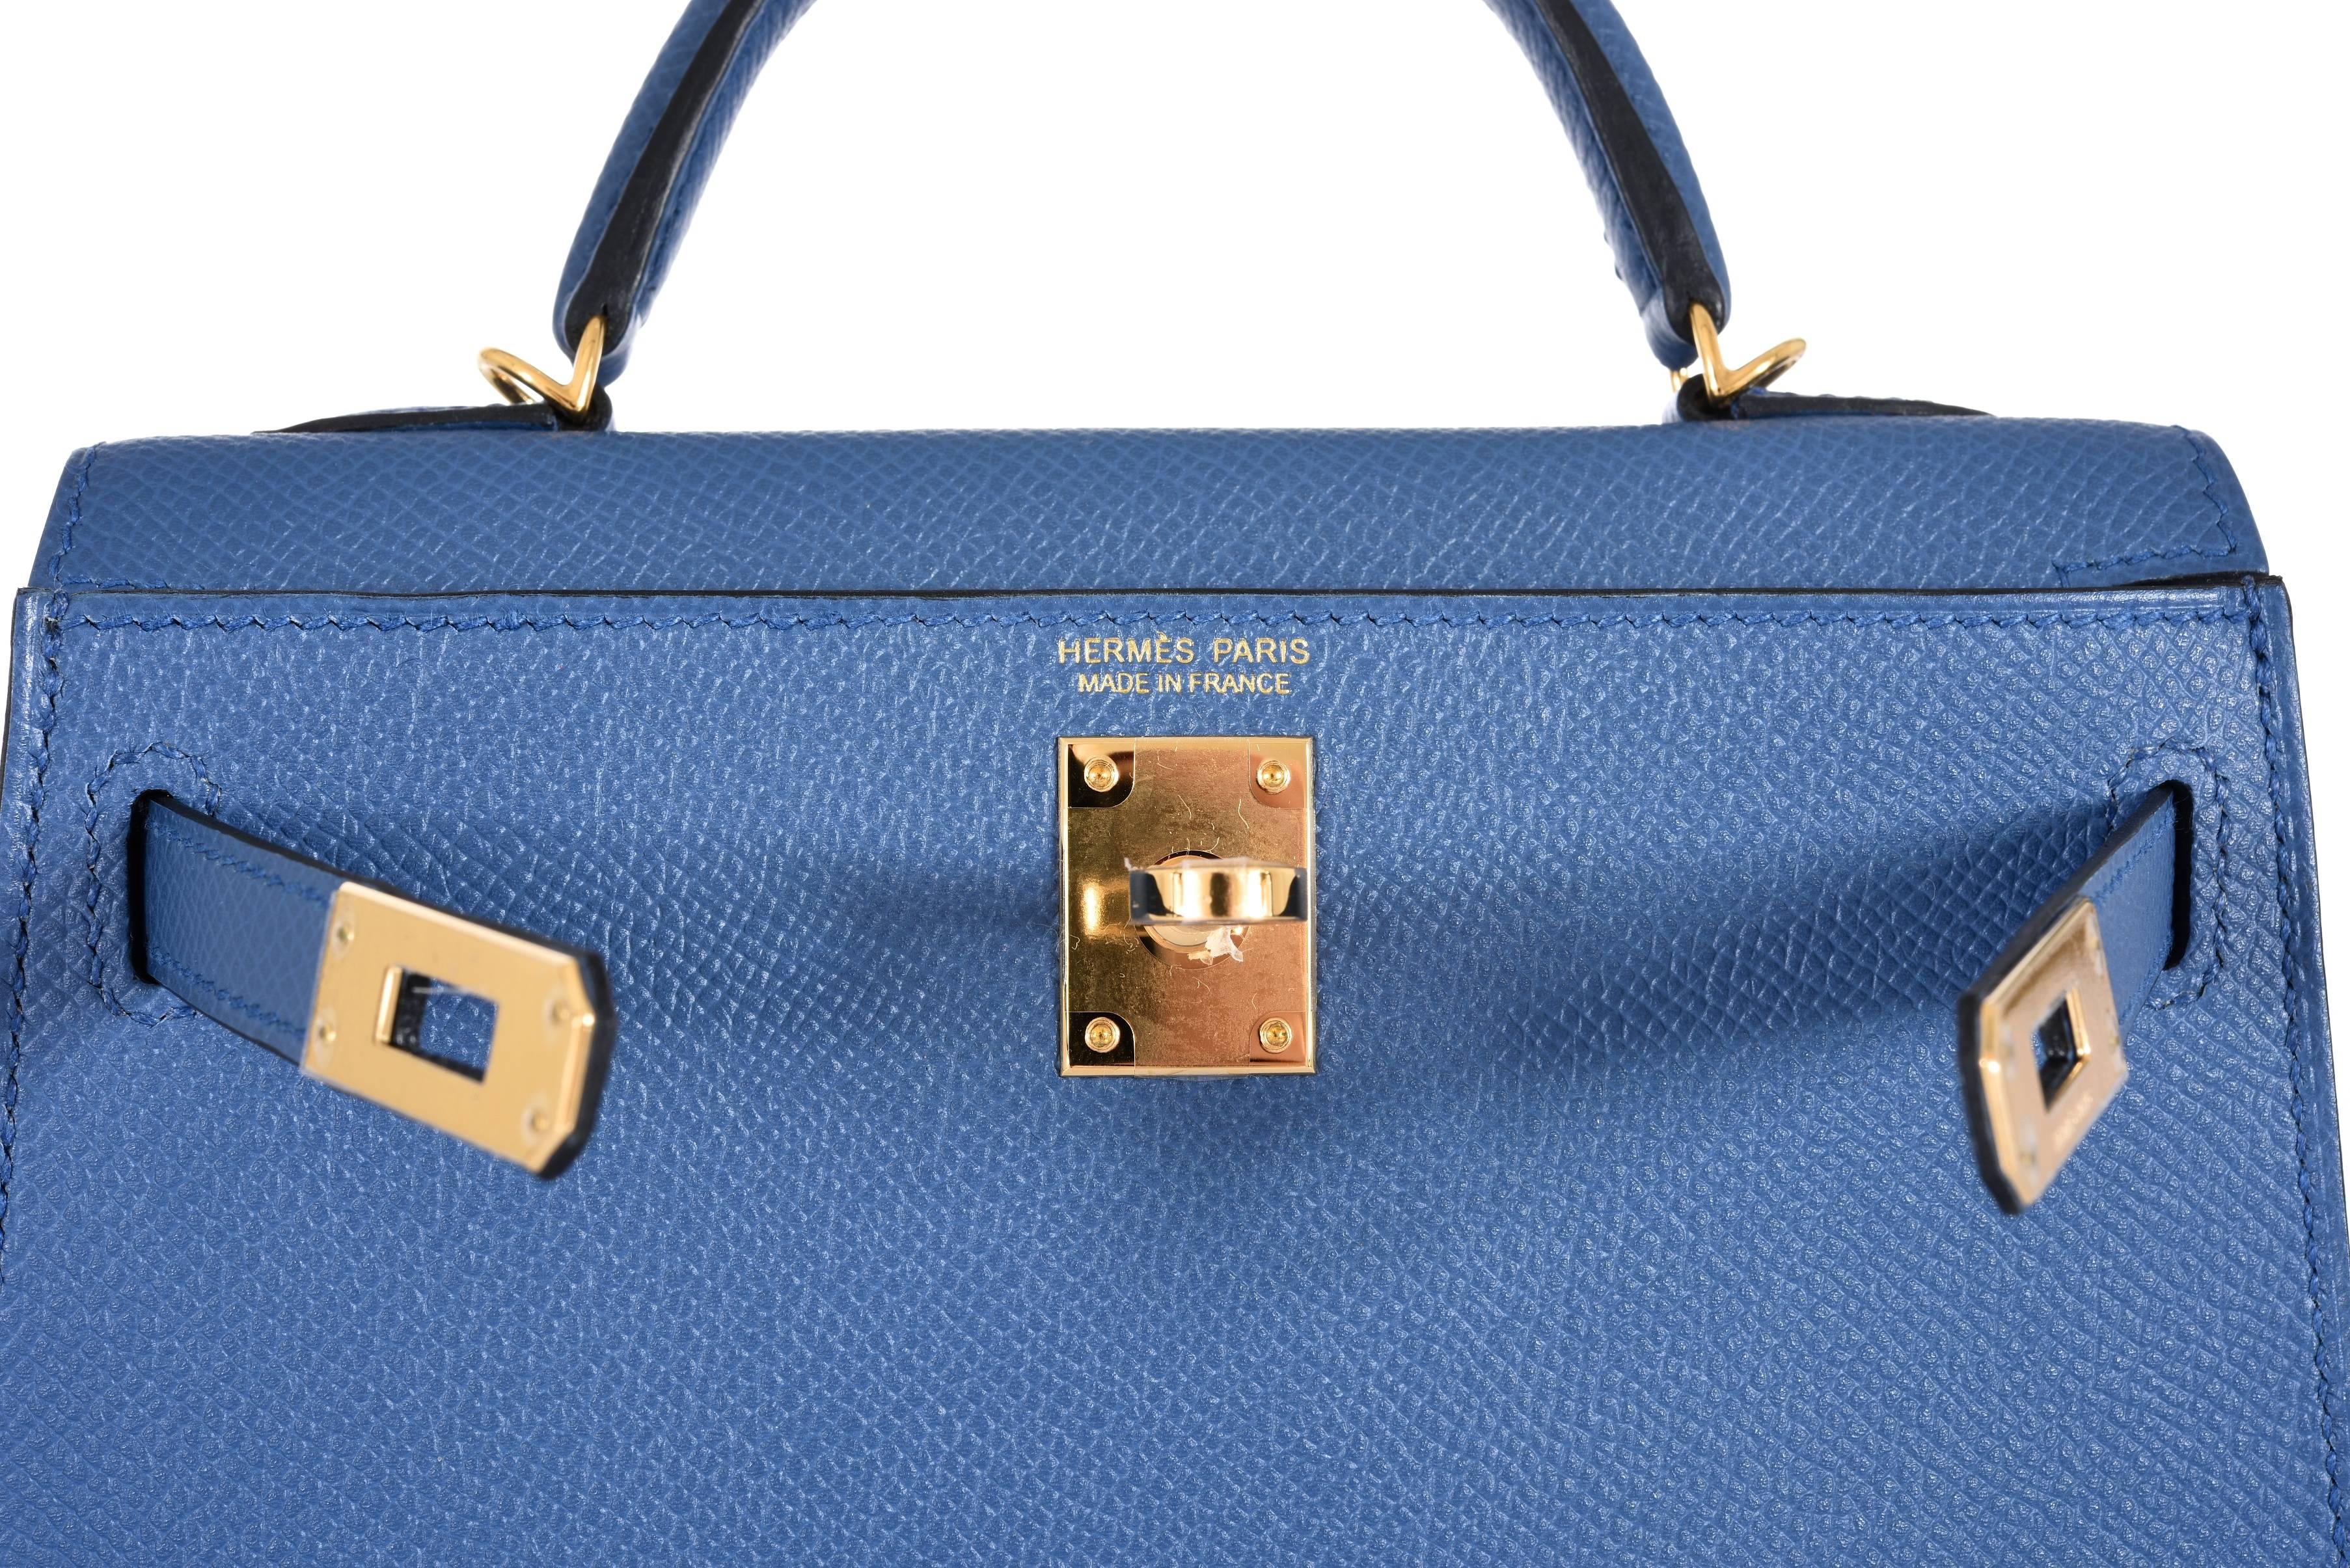 New Condition
New limited edition Hermes Kelly you have never seen before!
Hermes 20cm Kelly in stunning new blue agate Epsom leather with gold hardware.
This 20cm cross body Kelly is big enough to fit an iPhone 6 plus! Very limited production